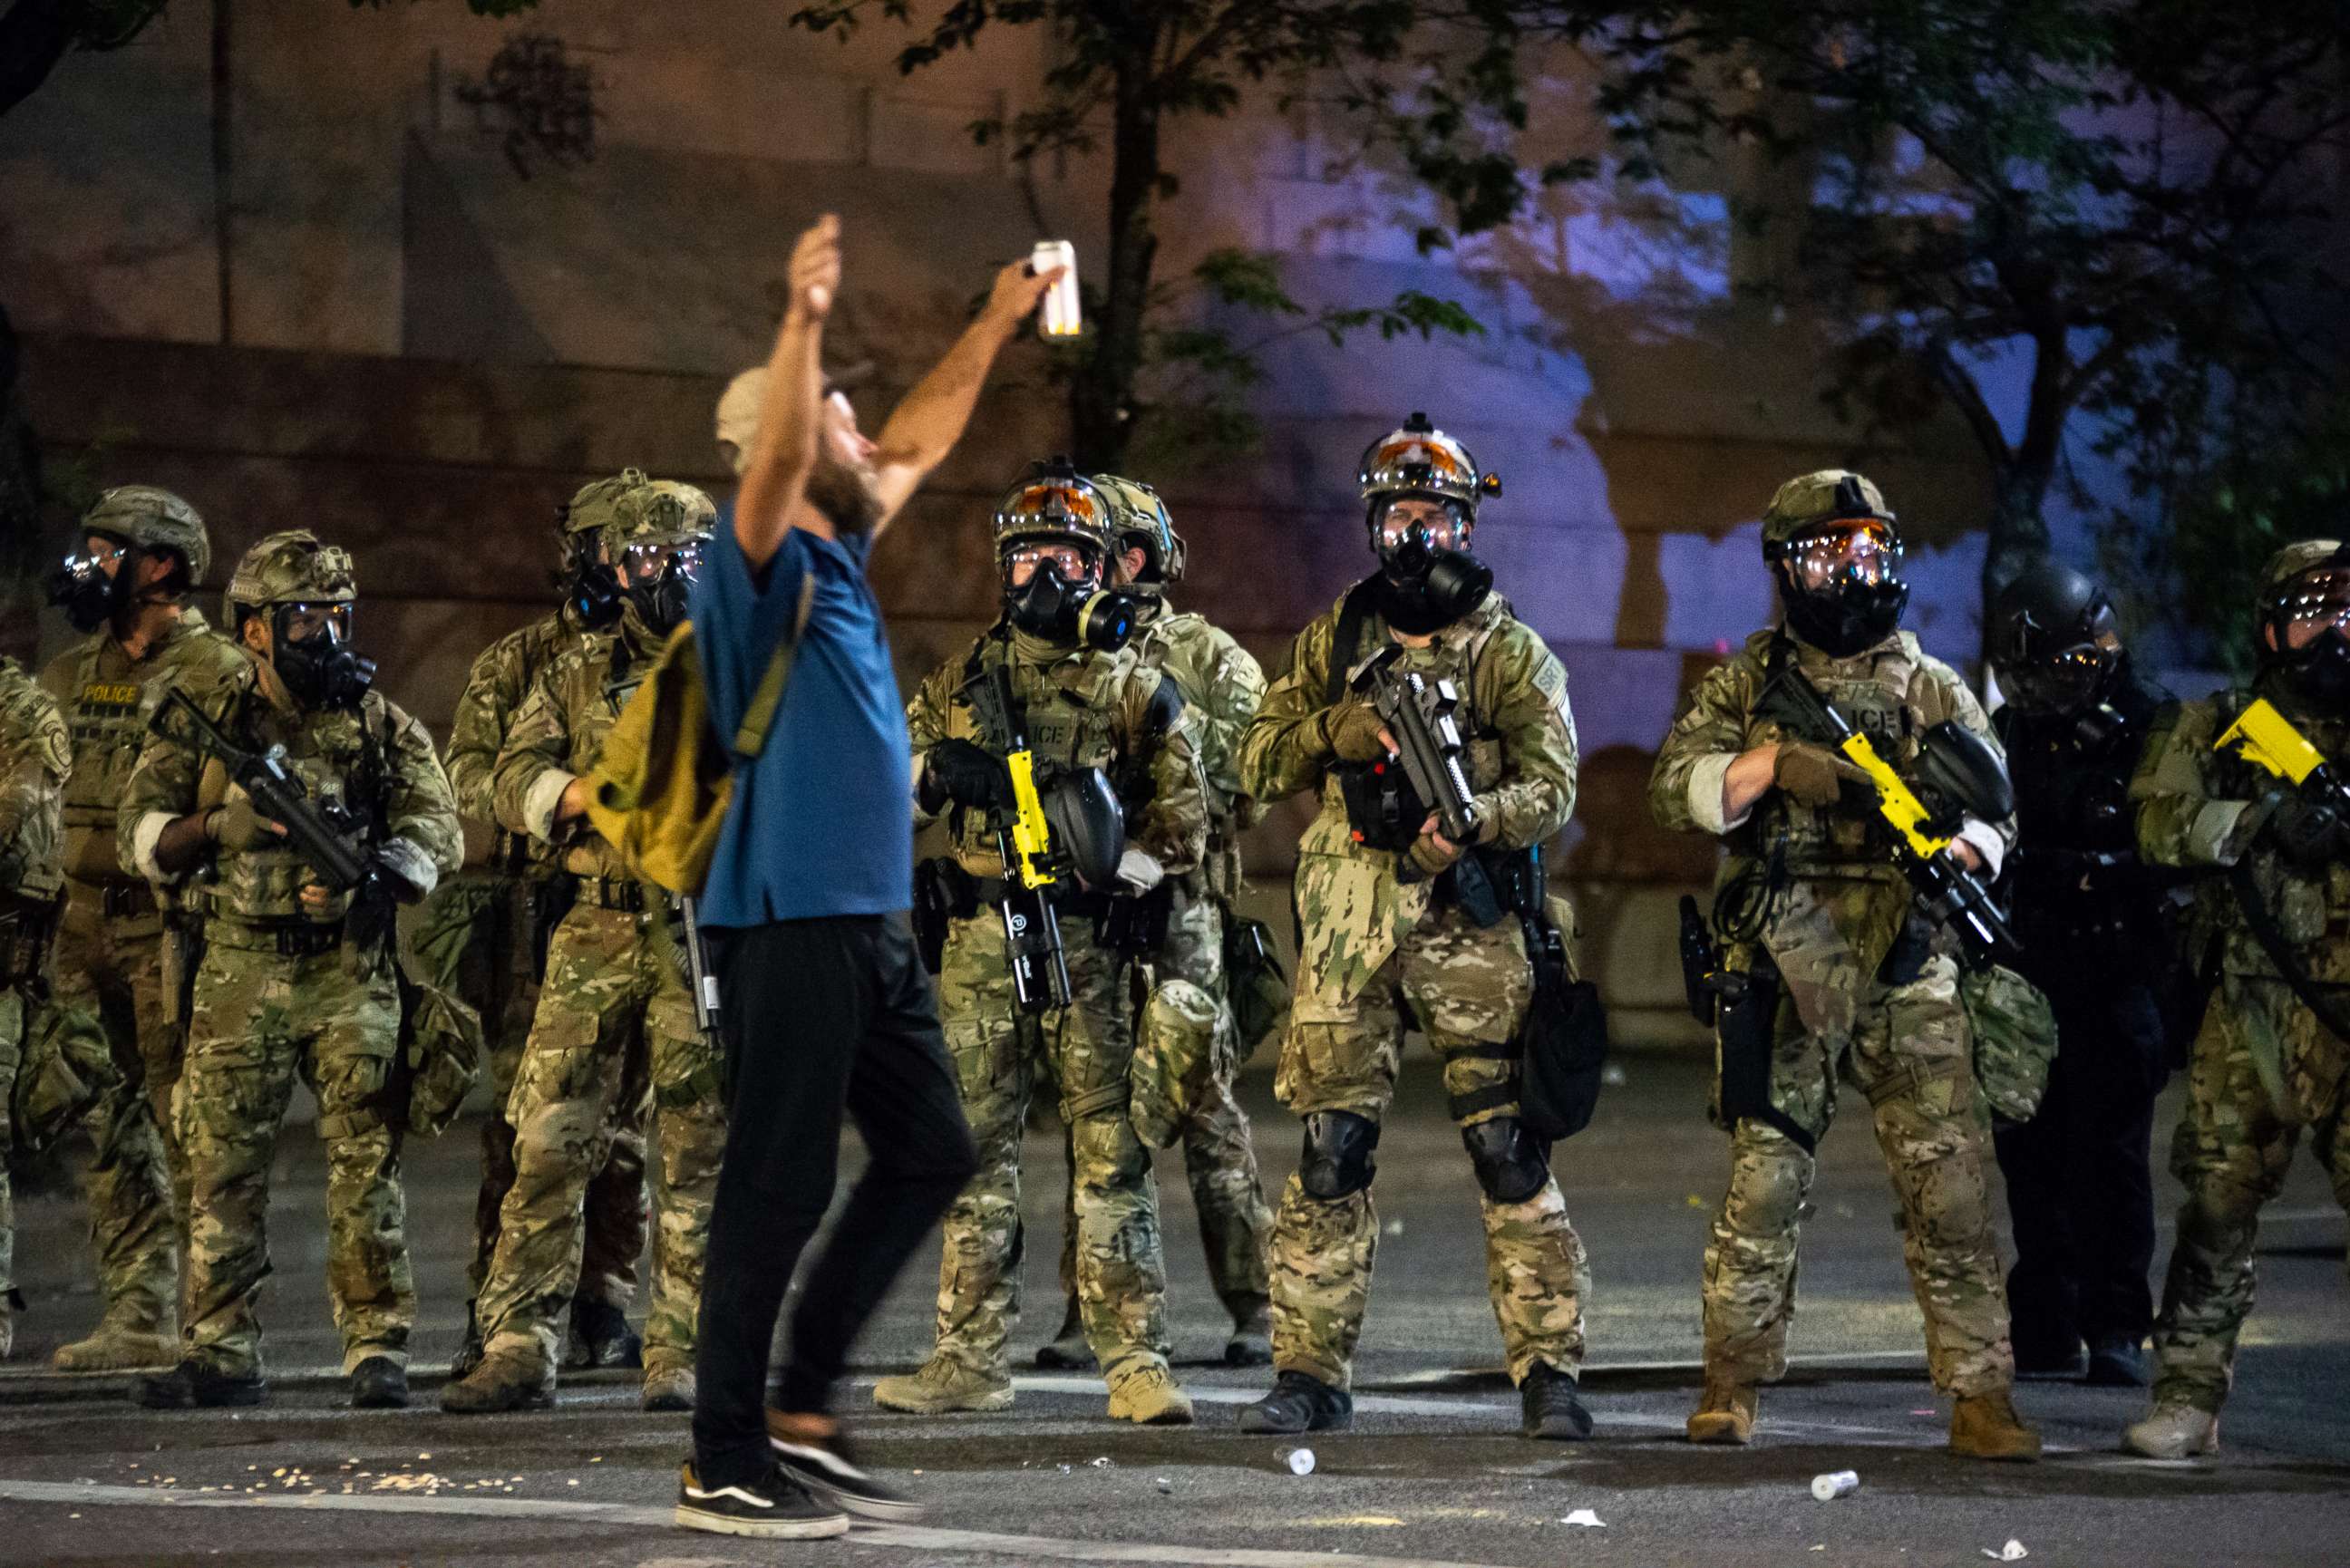 PHOTO: A protester holds his hands in the air while walking past a group of federal officers during a protest in front of the Mark O. Hatfield U.S. Courthouse on July 21, 2020, in Portland, Ore.